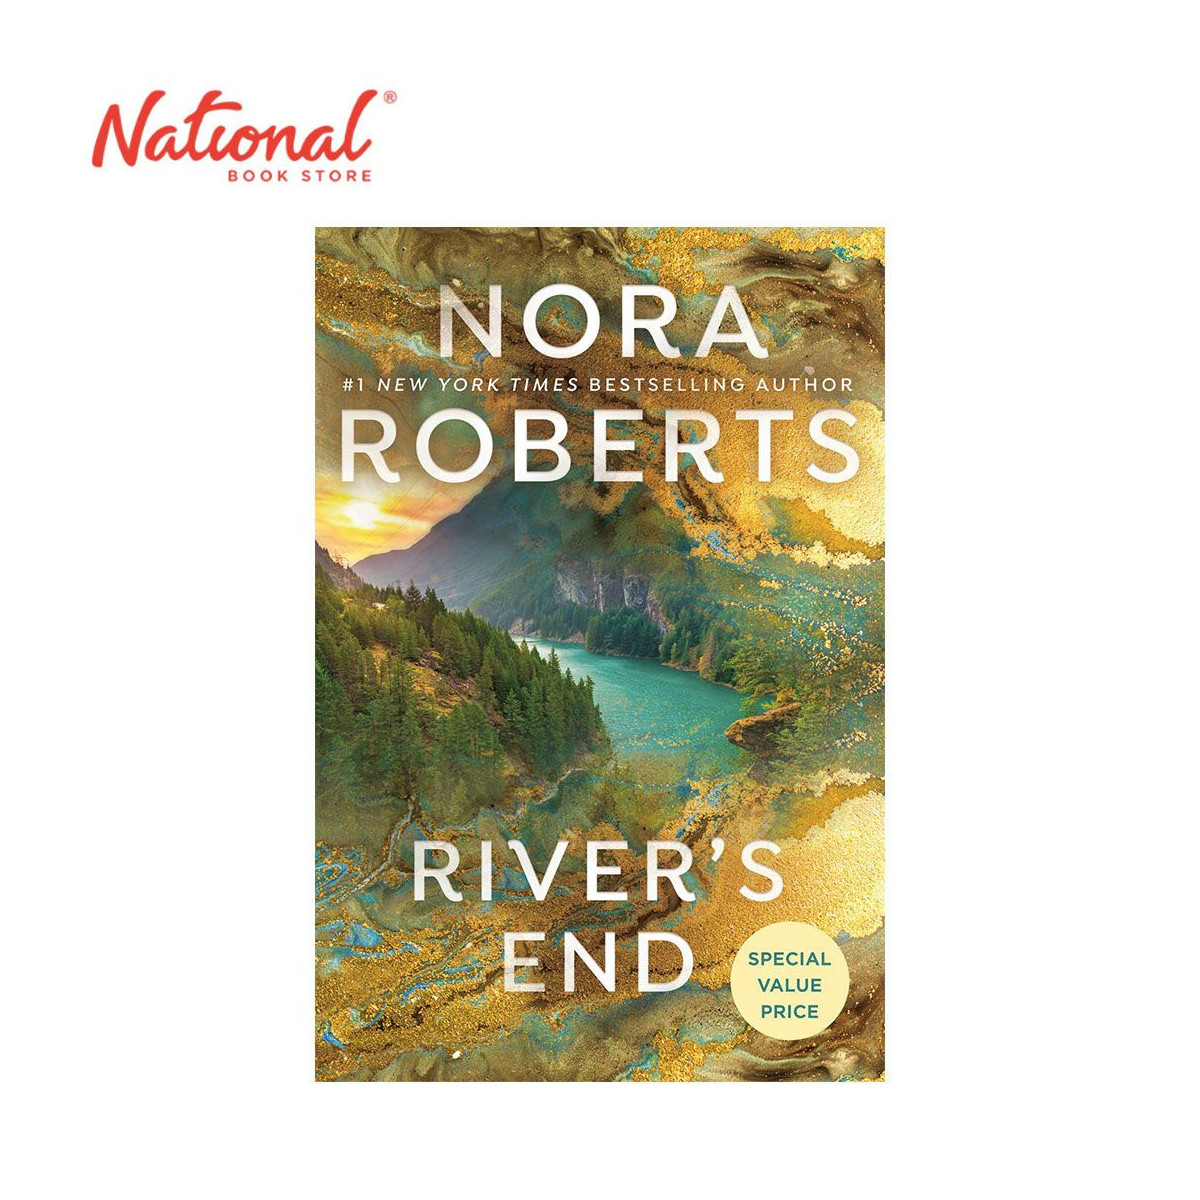 River's End by Nora Roberts - Trade Paperback - Contemporary Fiction